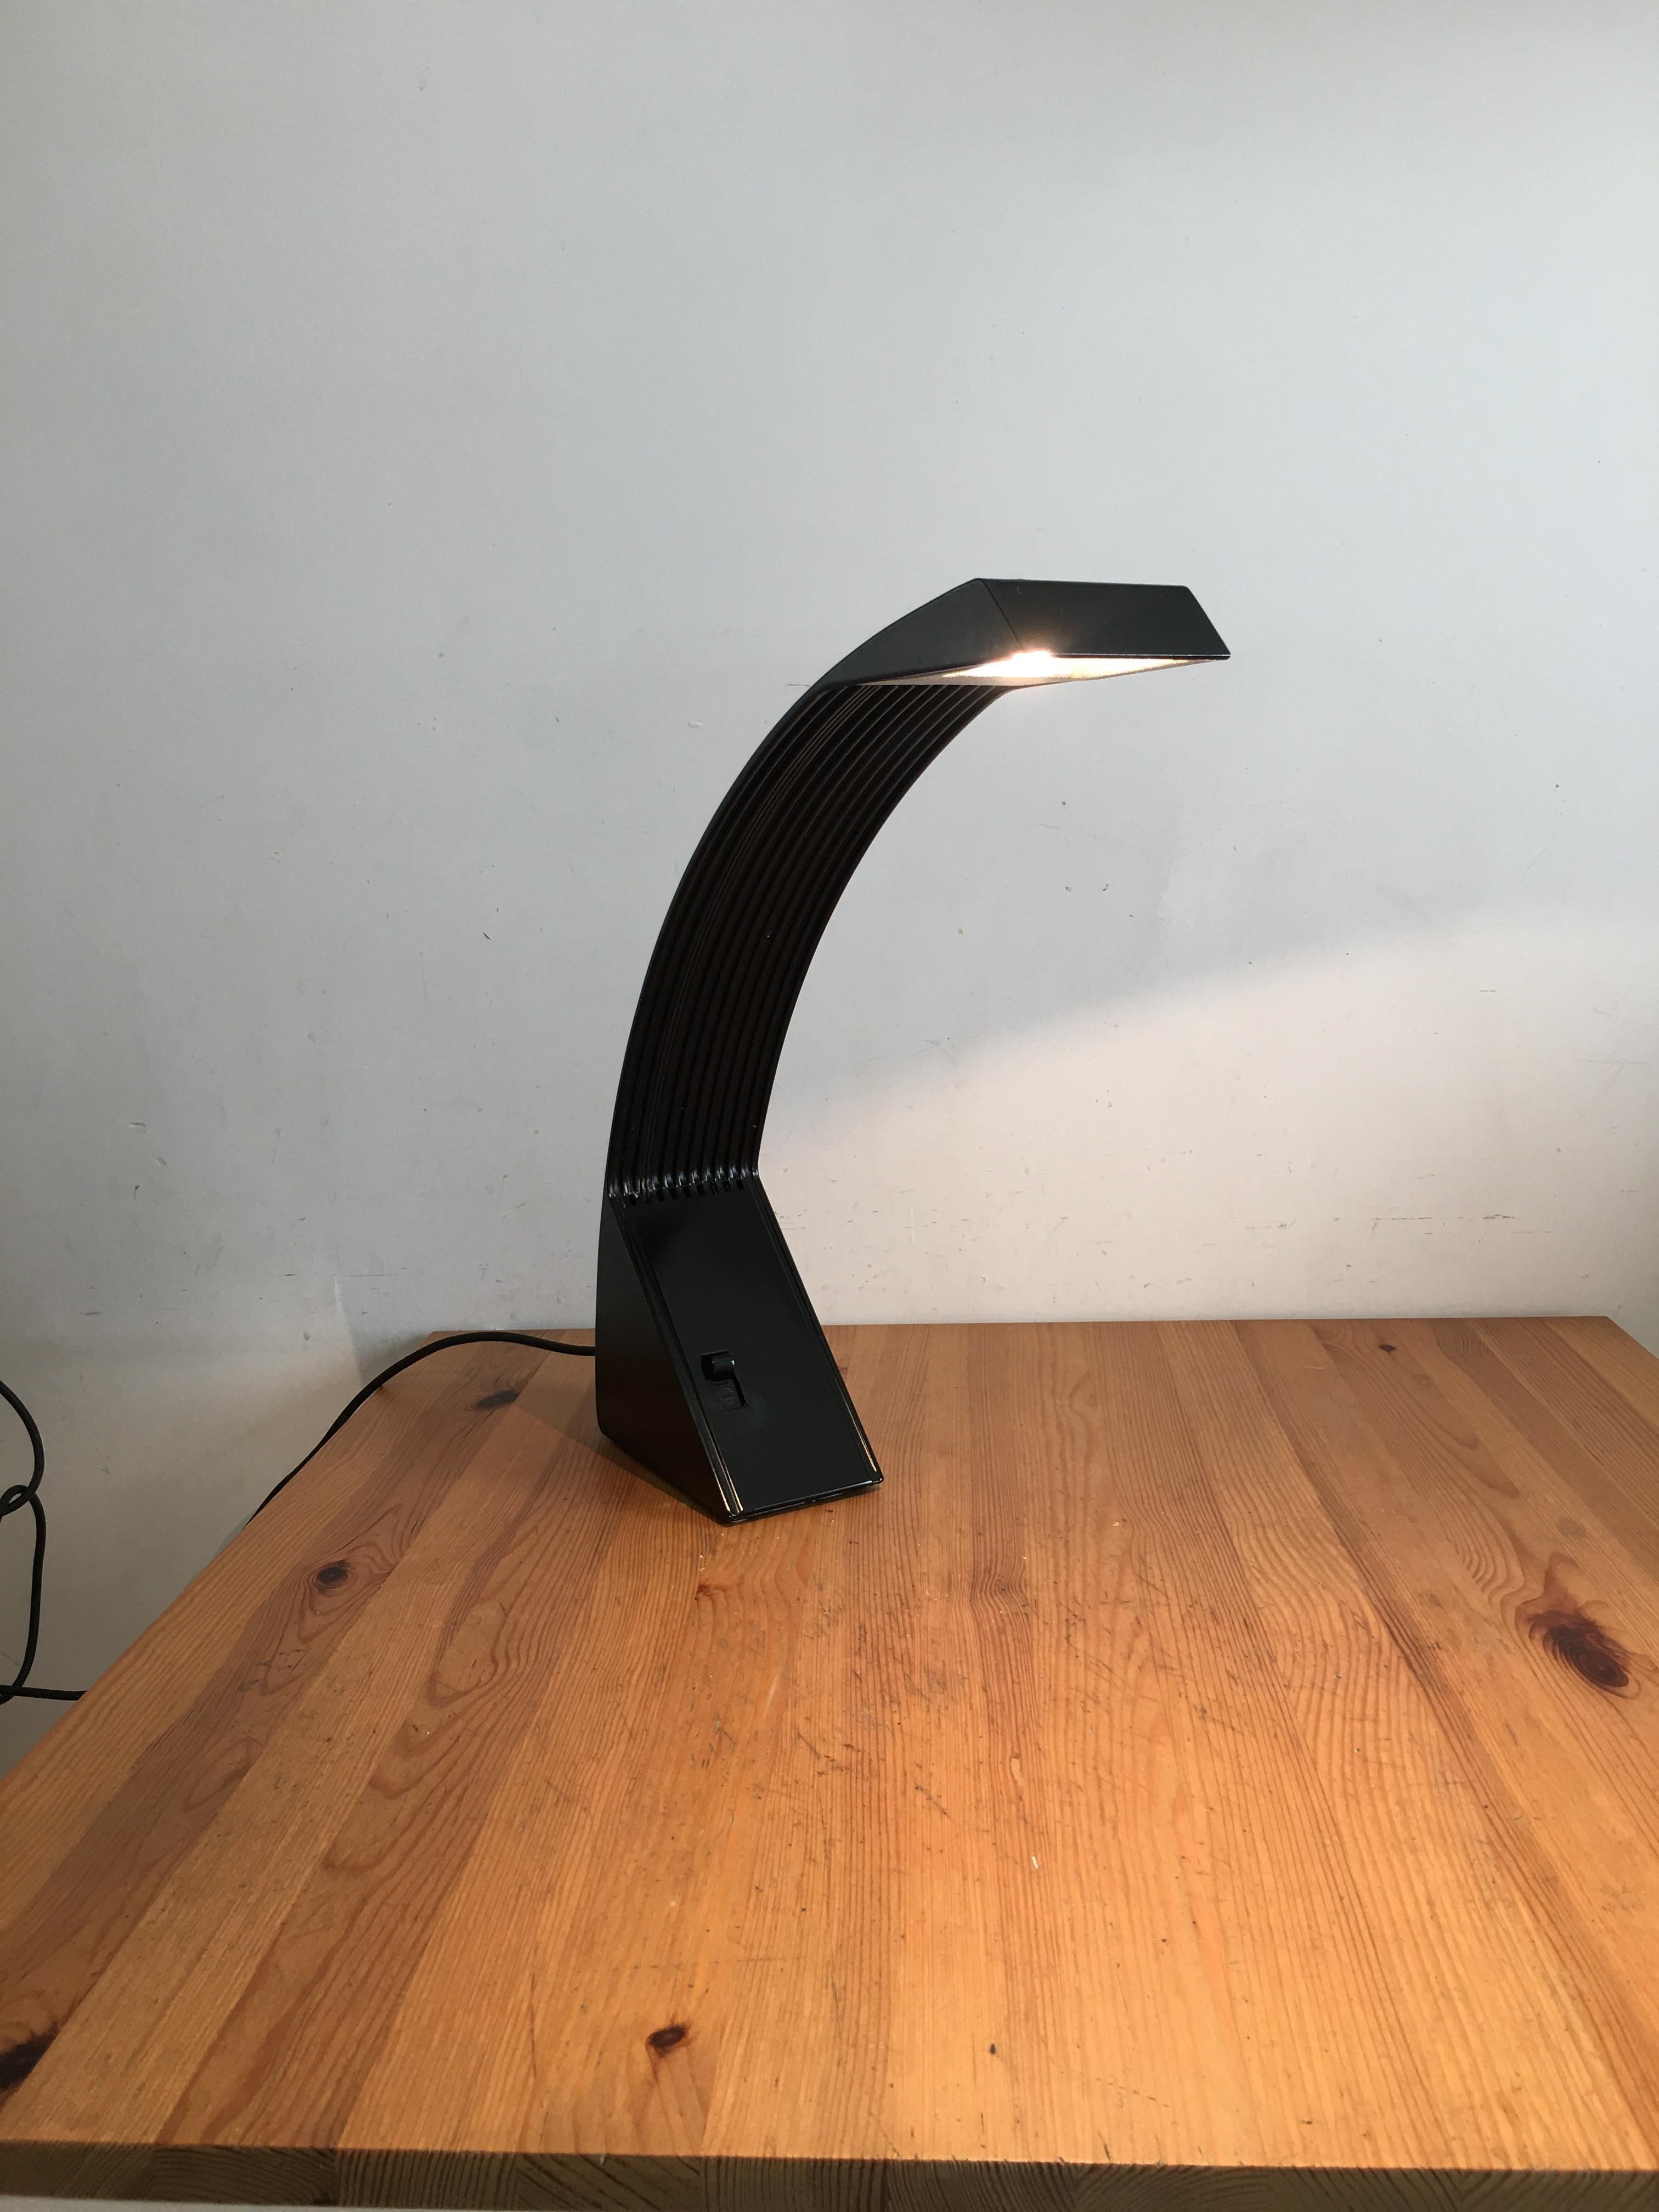 Vintage Rainbow Table Lamp by Marco Zotta for CIL For Sale 4